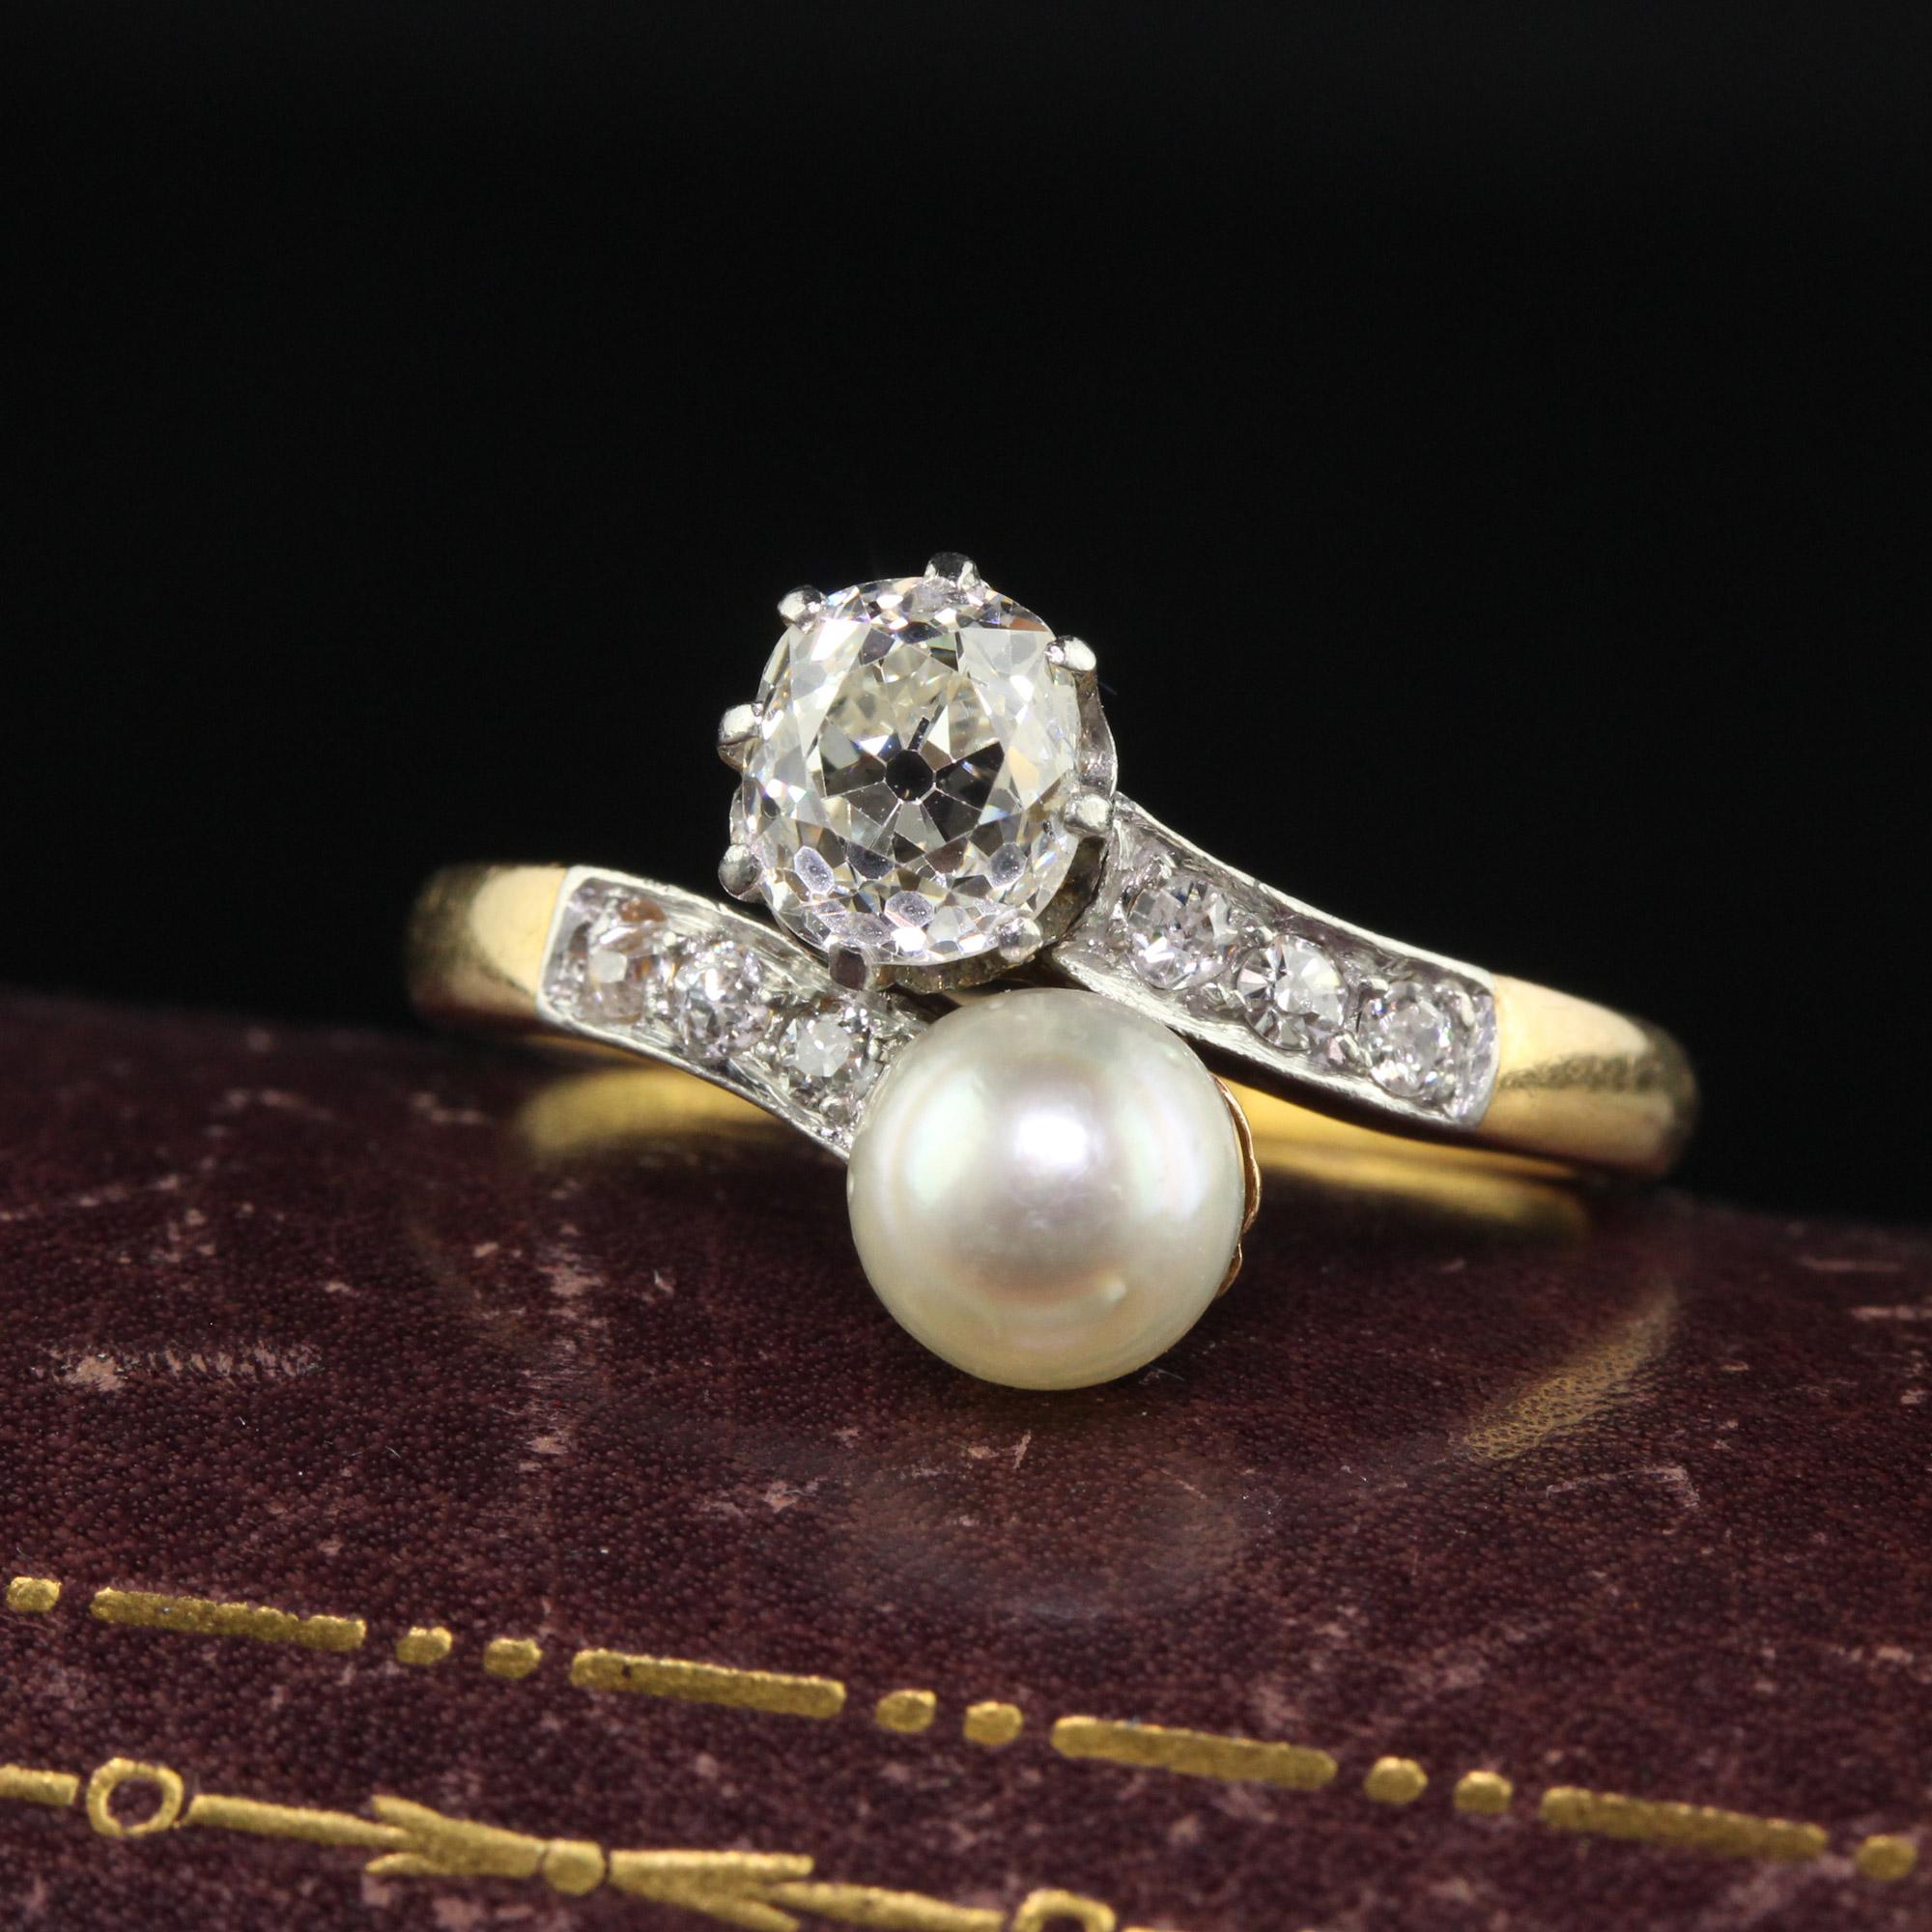 Beautiful Antique Edwardian 18K Yellow Gold Old Mine Cut Diamond and Pearl Toi et Moi Engagement Ring. This classic Toi et Moi engagement ring is crafted in 18k yellow gold and platinum top. The ring holds a chunky old mine cut diamond on one side